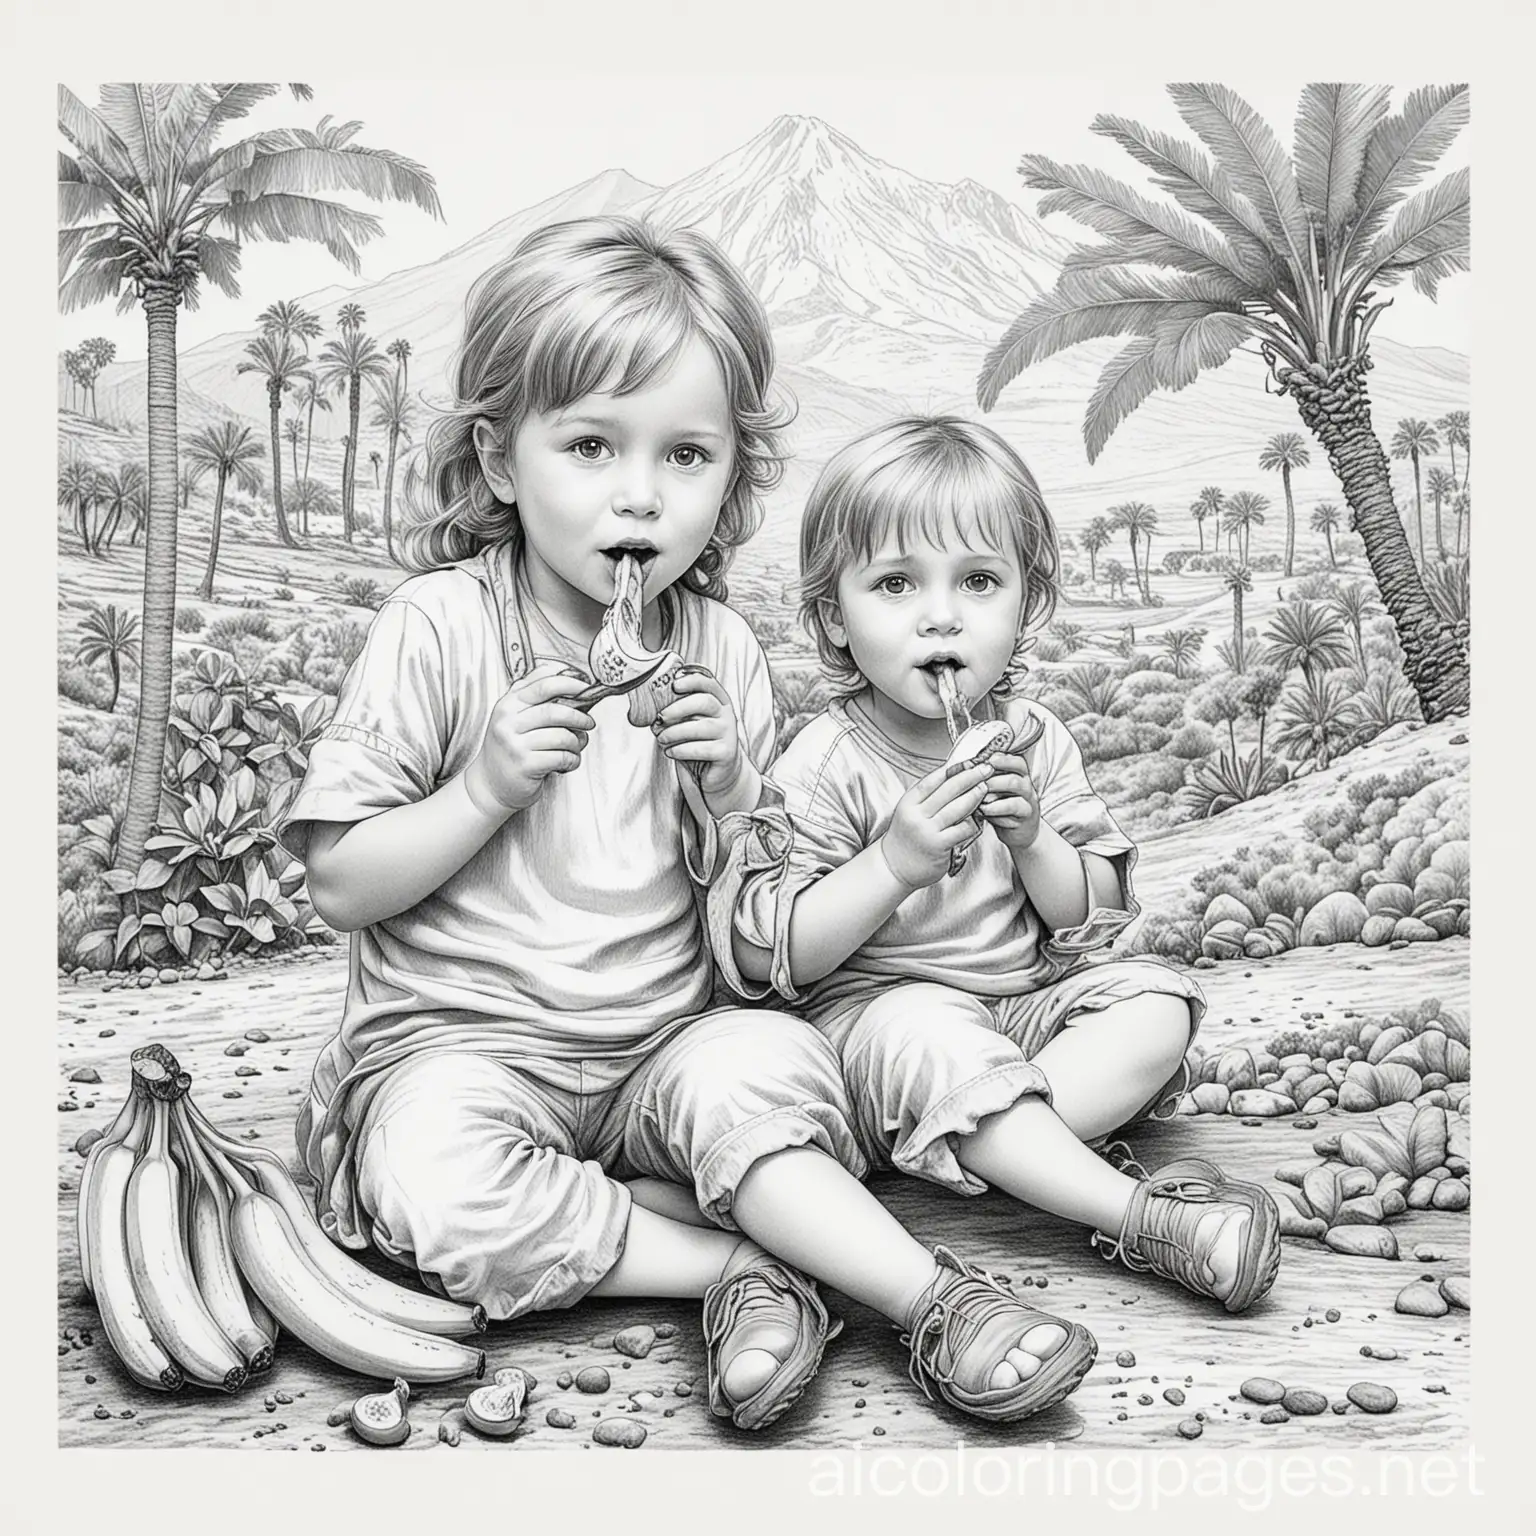 Children-Eating-Bananas-in-Teide-Coloring-Page-Simple-Black-and-White-Line-Art-on-White-Background